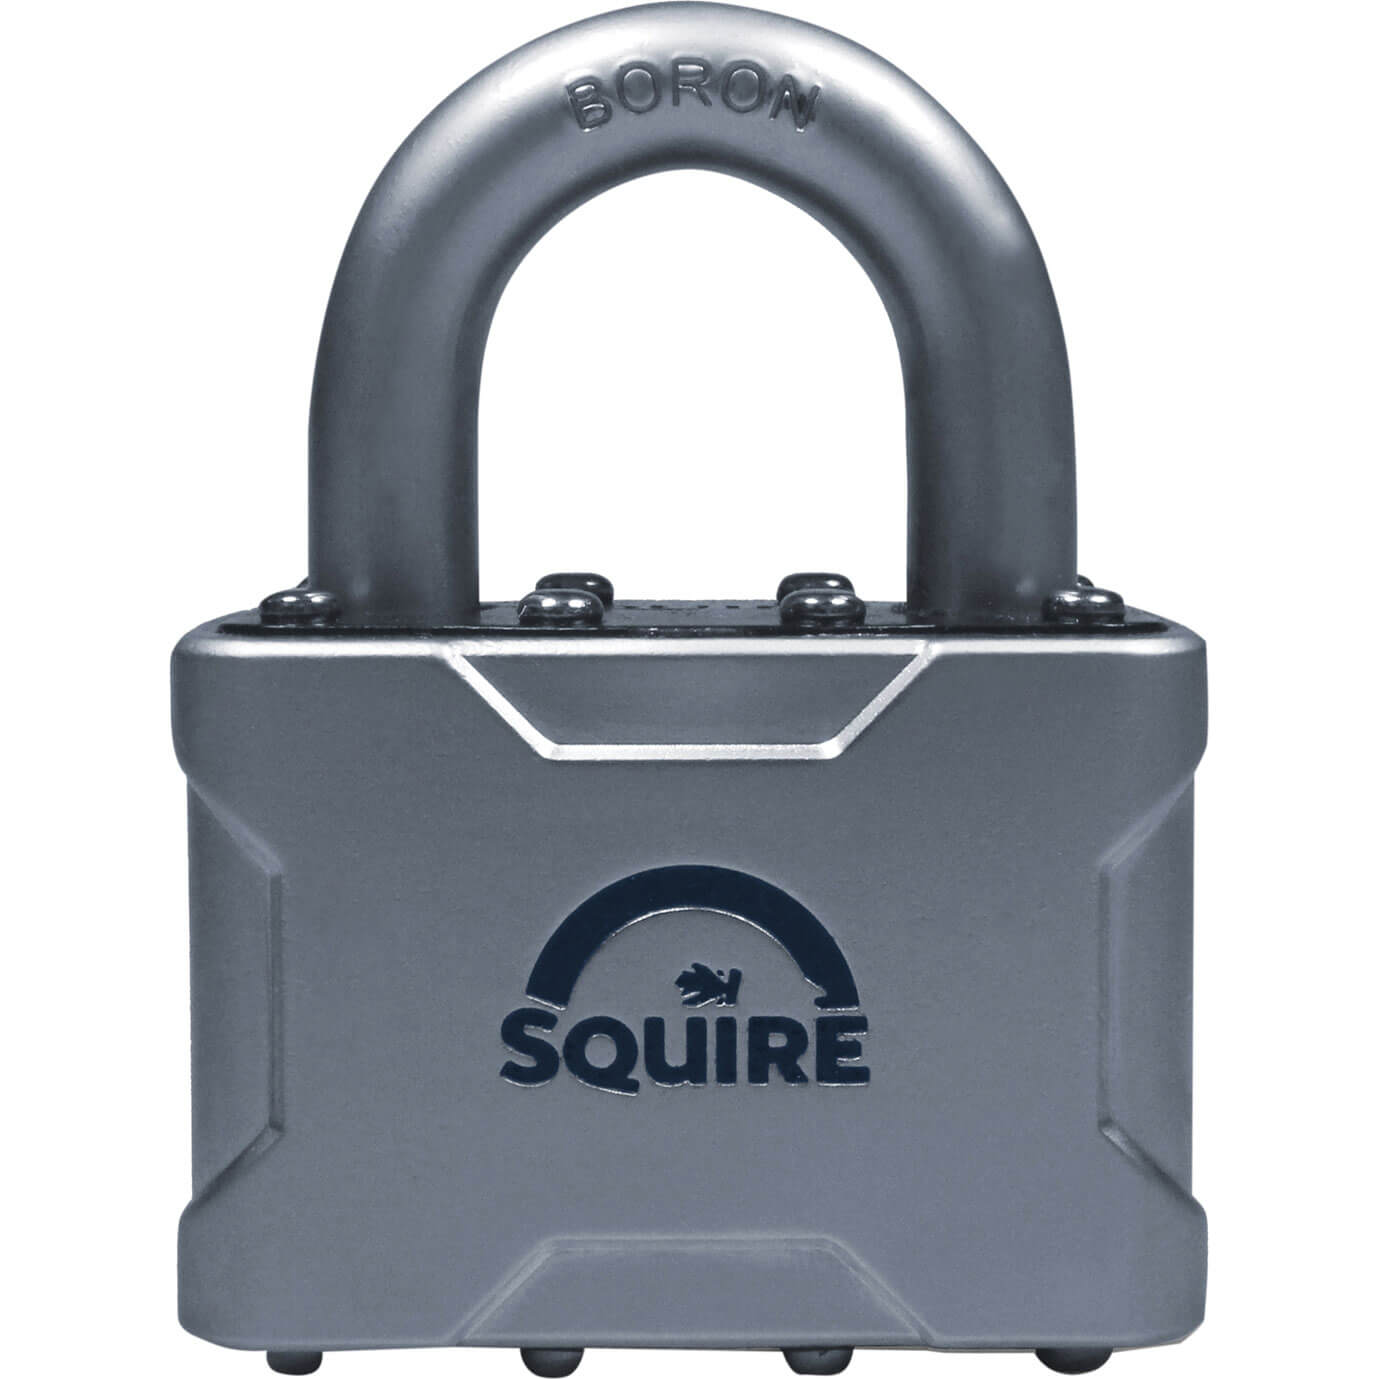 Image of Henry Squire Vulcan Boron Shackle Padlock 50mm Standard